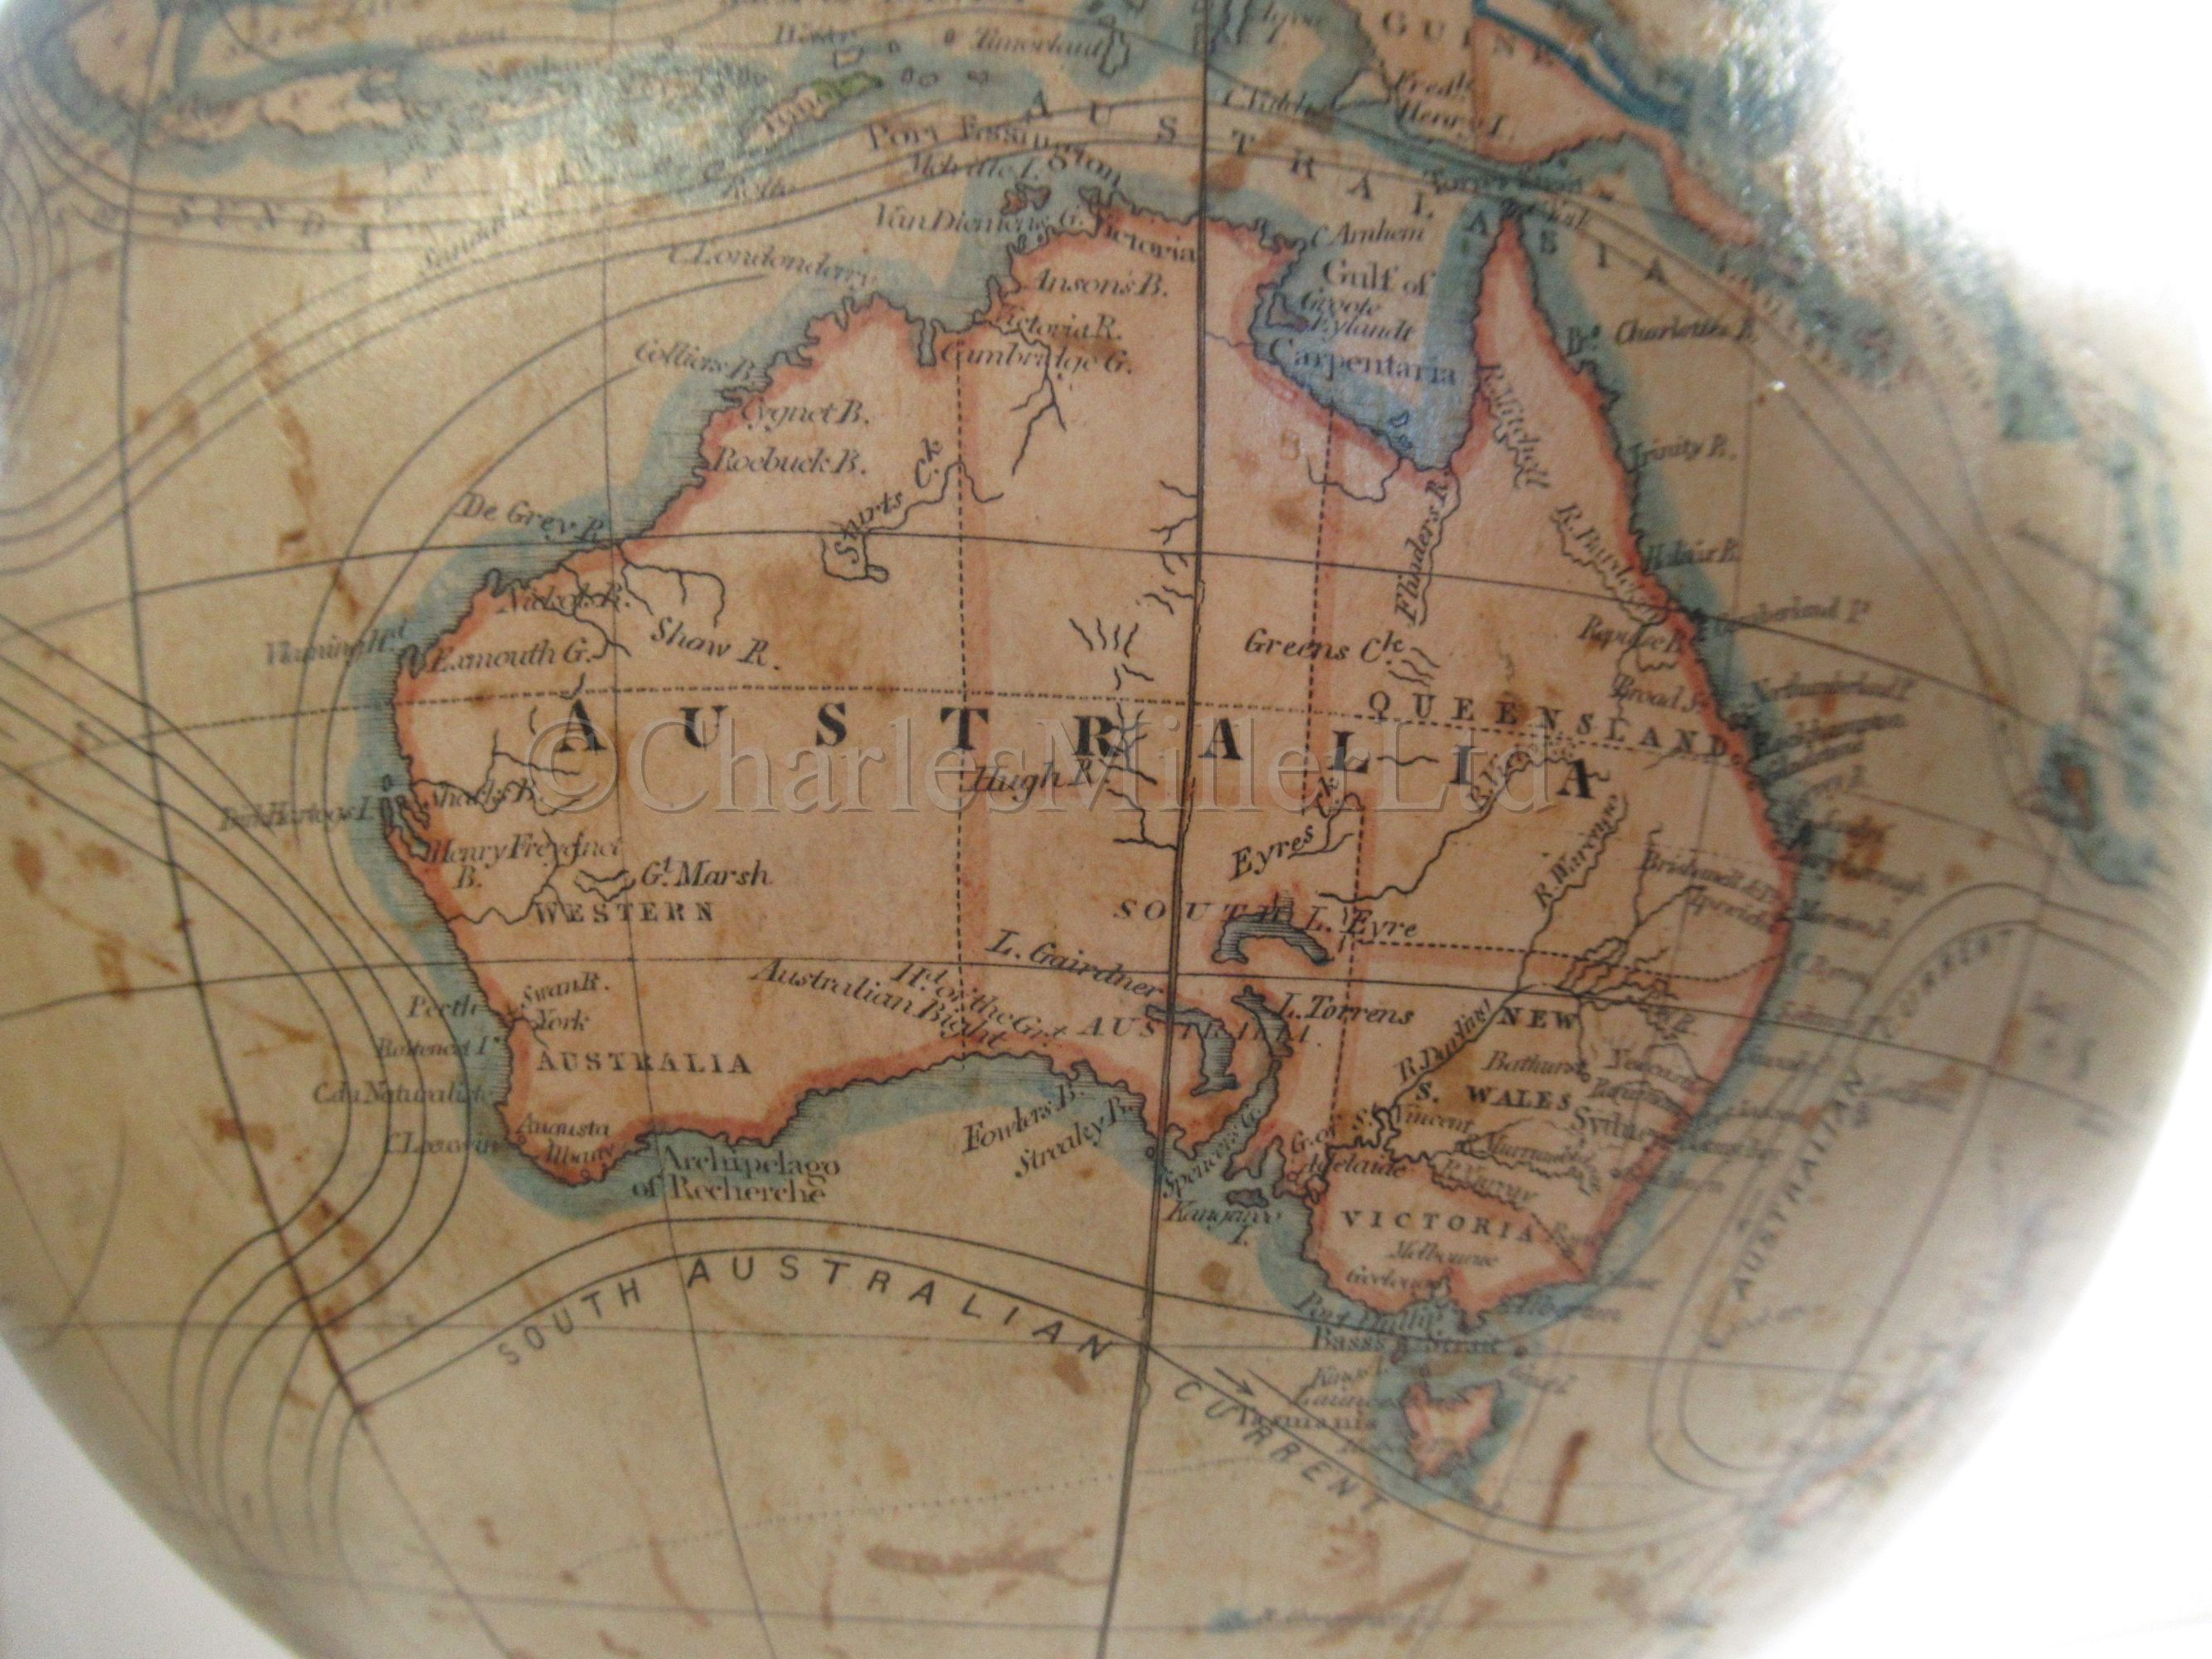 A 10IN. TERRESTRIAL GLOBE BY C. SMITH & SON, LONDON. CIRCA 1890 - Image 7 of 12